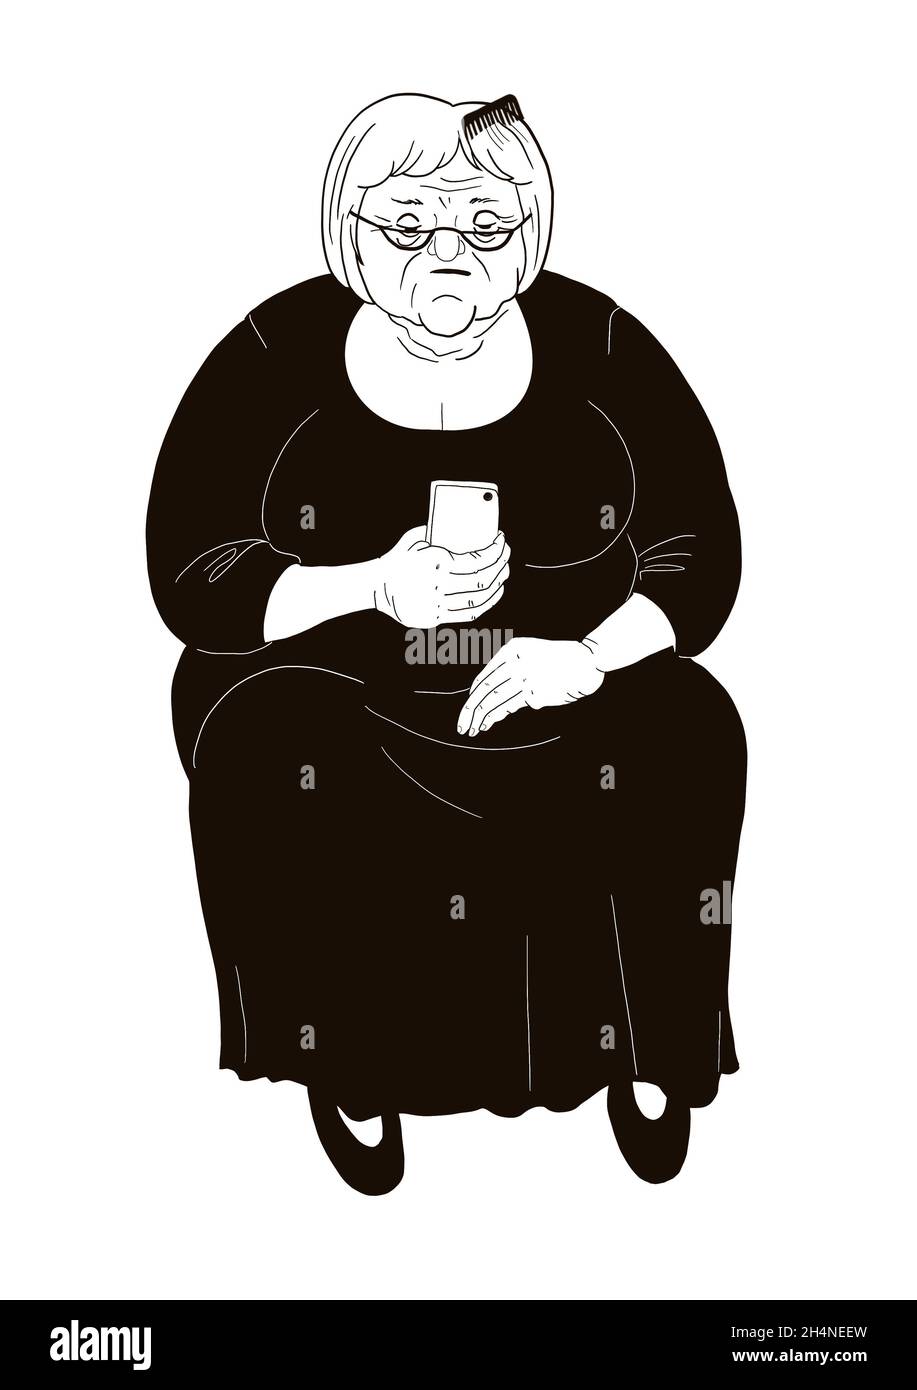 An elderly woman reads a message on a smartphone. Character illustration isolated on white background. Stock Photo